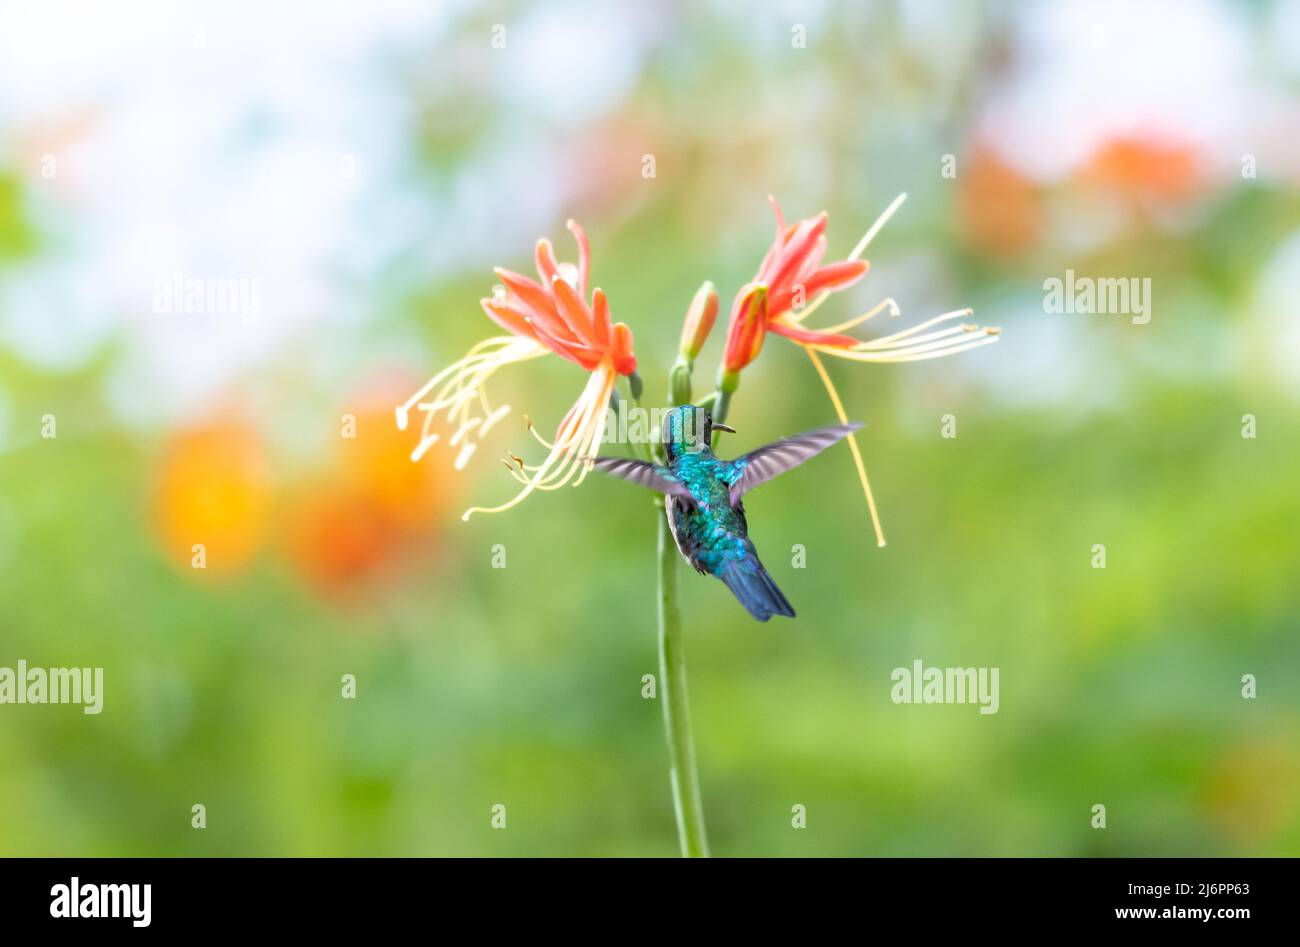 Dainty, Blue-chinned Sapphire hummingbird, Chlorestes notata, flying away from camera towards an orange Guernsey Lily in bright sunlight. Stock Photo